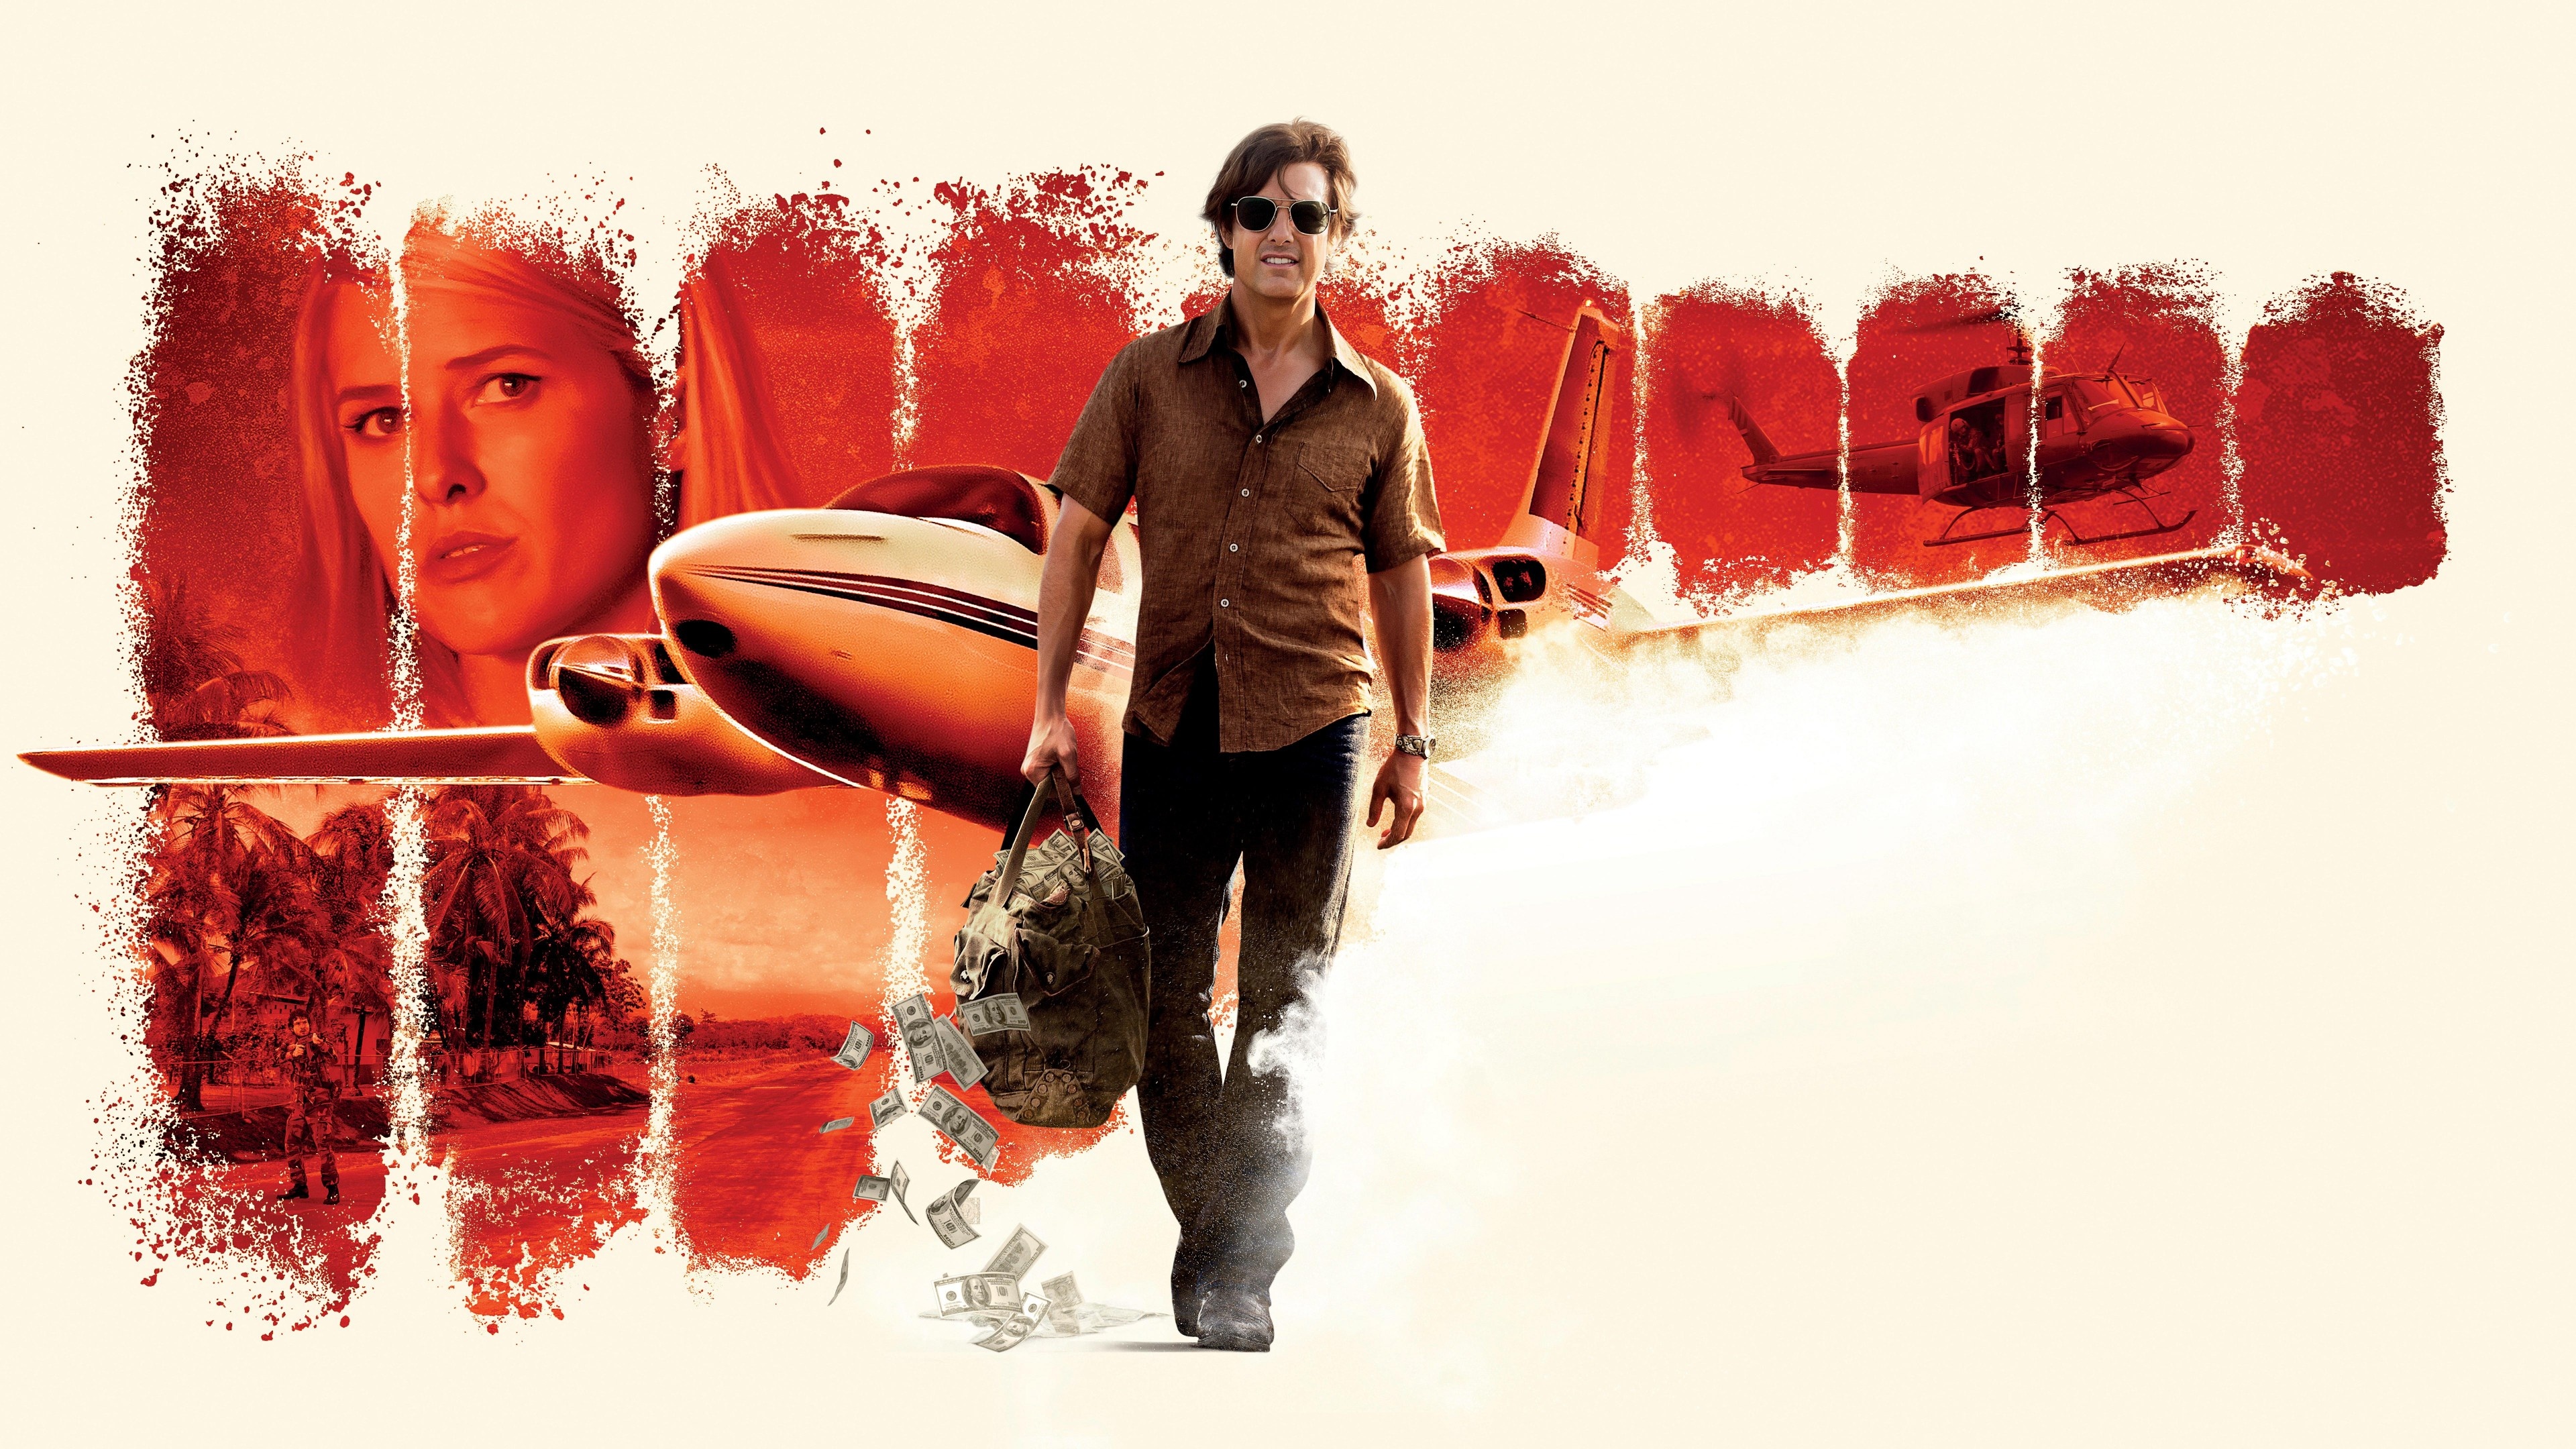 American Made, Tom Cruise's character, Sarah Wright's role, 8K movie wallpaper, 3840x2160 4K Desktop